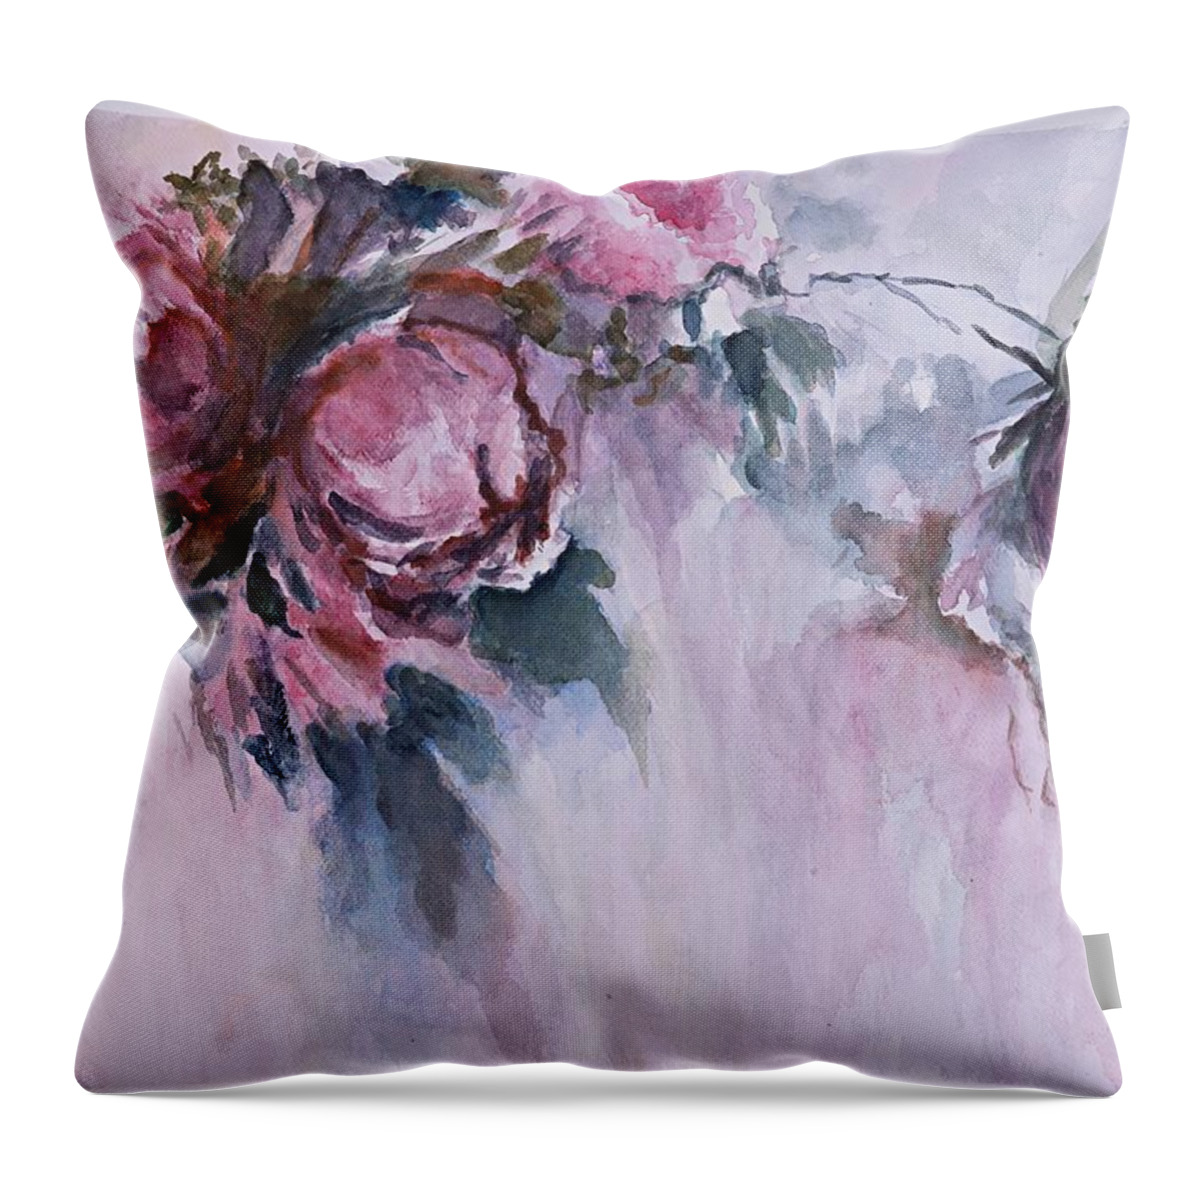 Flowers Throw Pillow featuring the painting Floral Watercolor by Vesna Martinjak